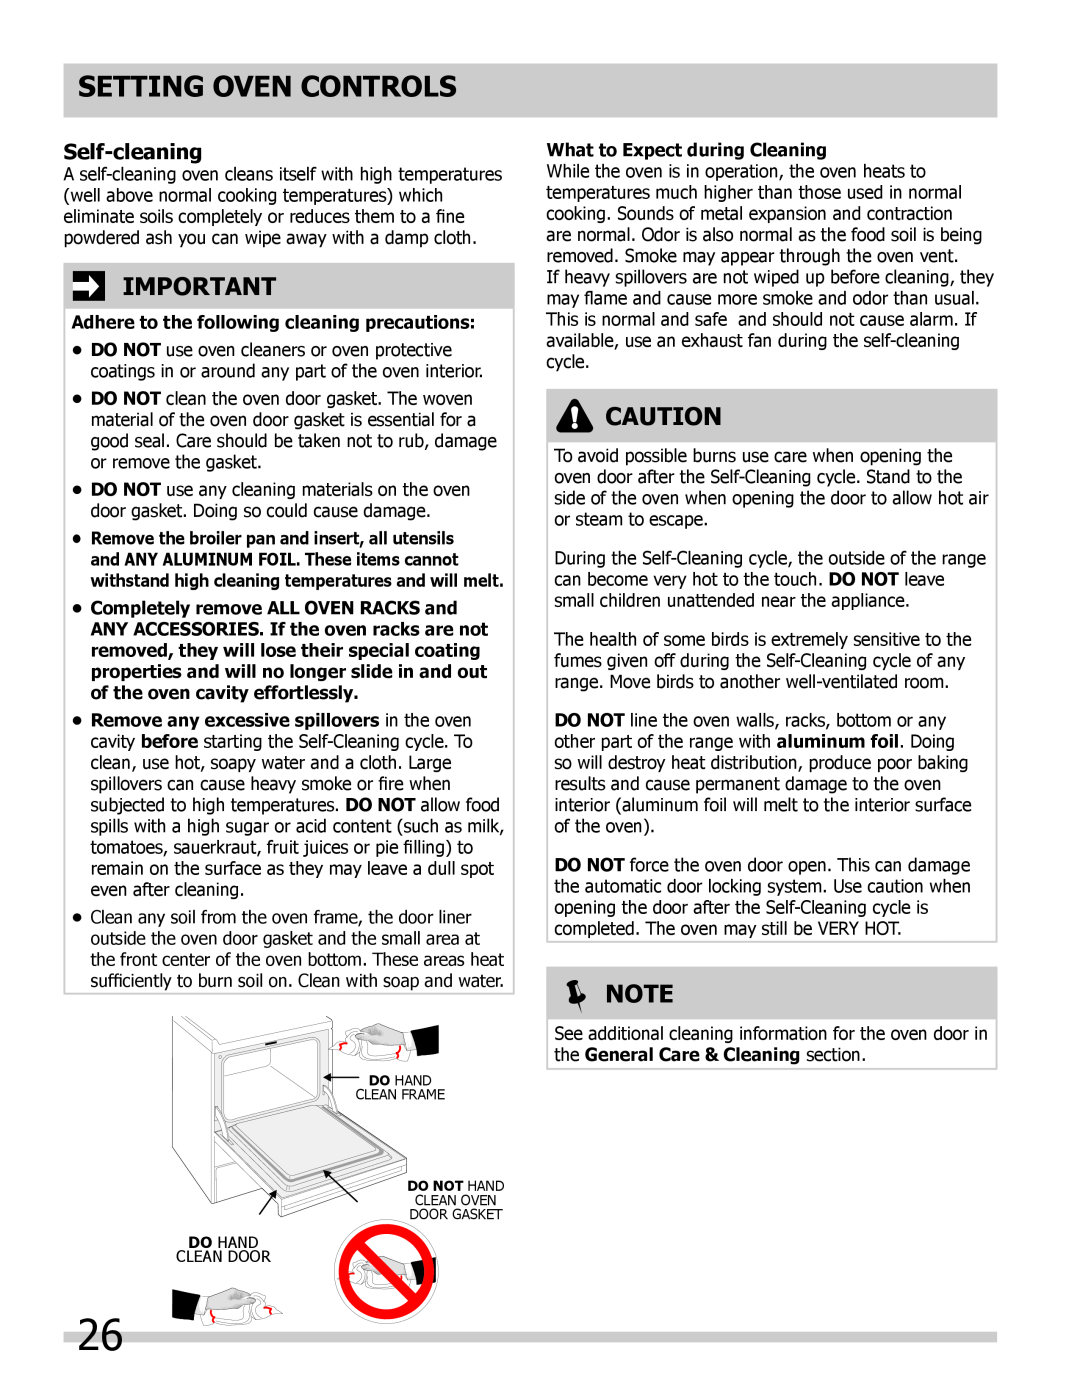 Frigidaire 318205852 Self-cleaning, Adhere to the following cleaning precautions, What to Expect during Cleaning,  Note 